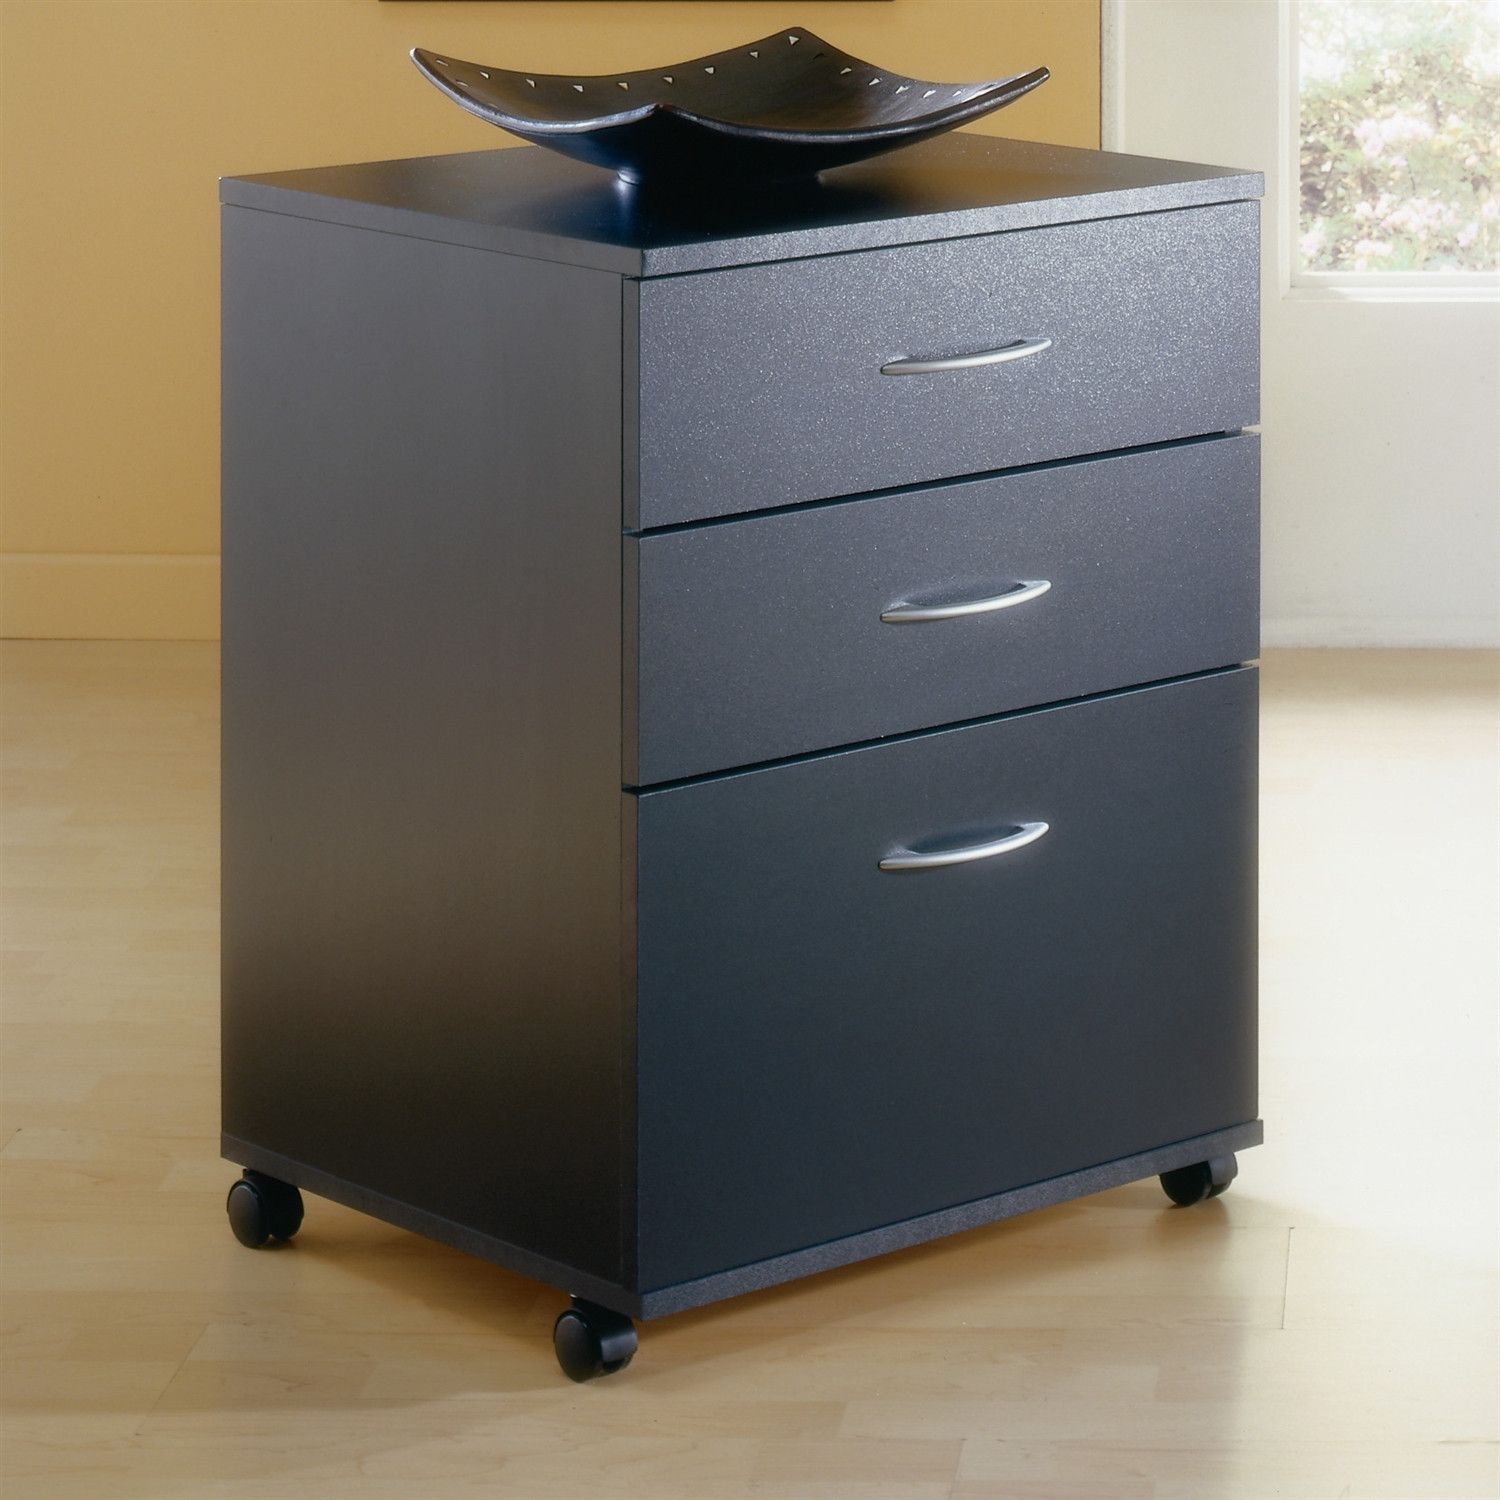 3 Drawer Home Office Filing Cabinet With Casters In Black Wood For Size 1500 X 1500 